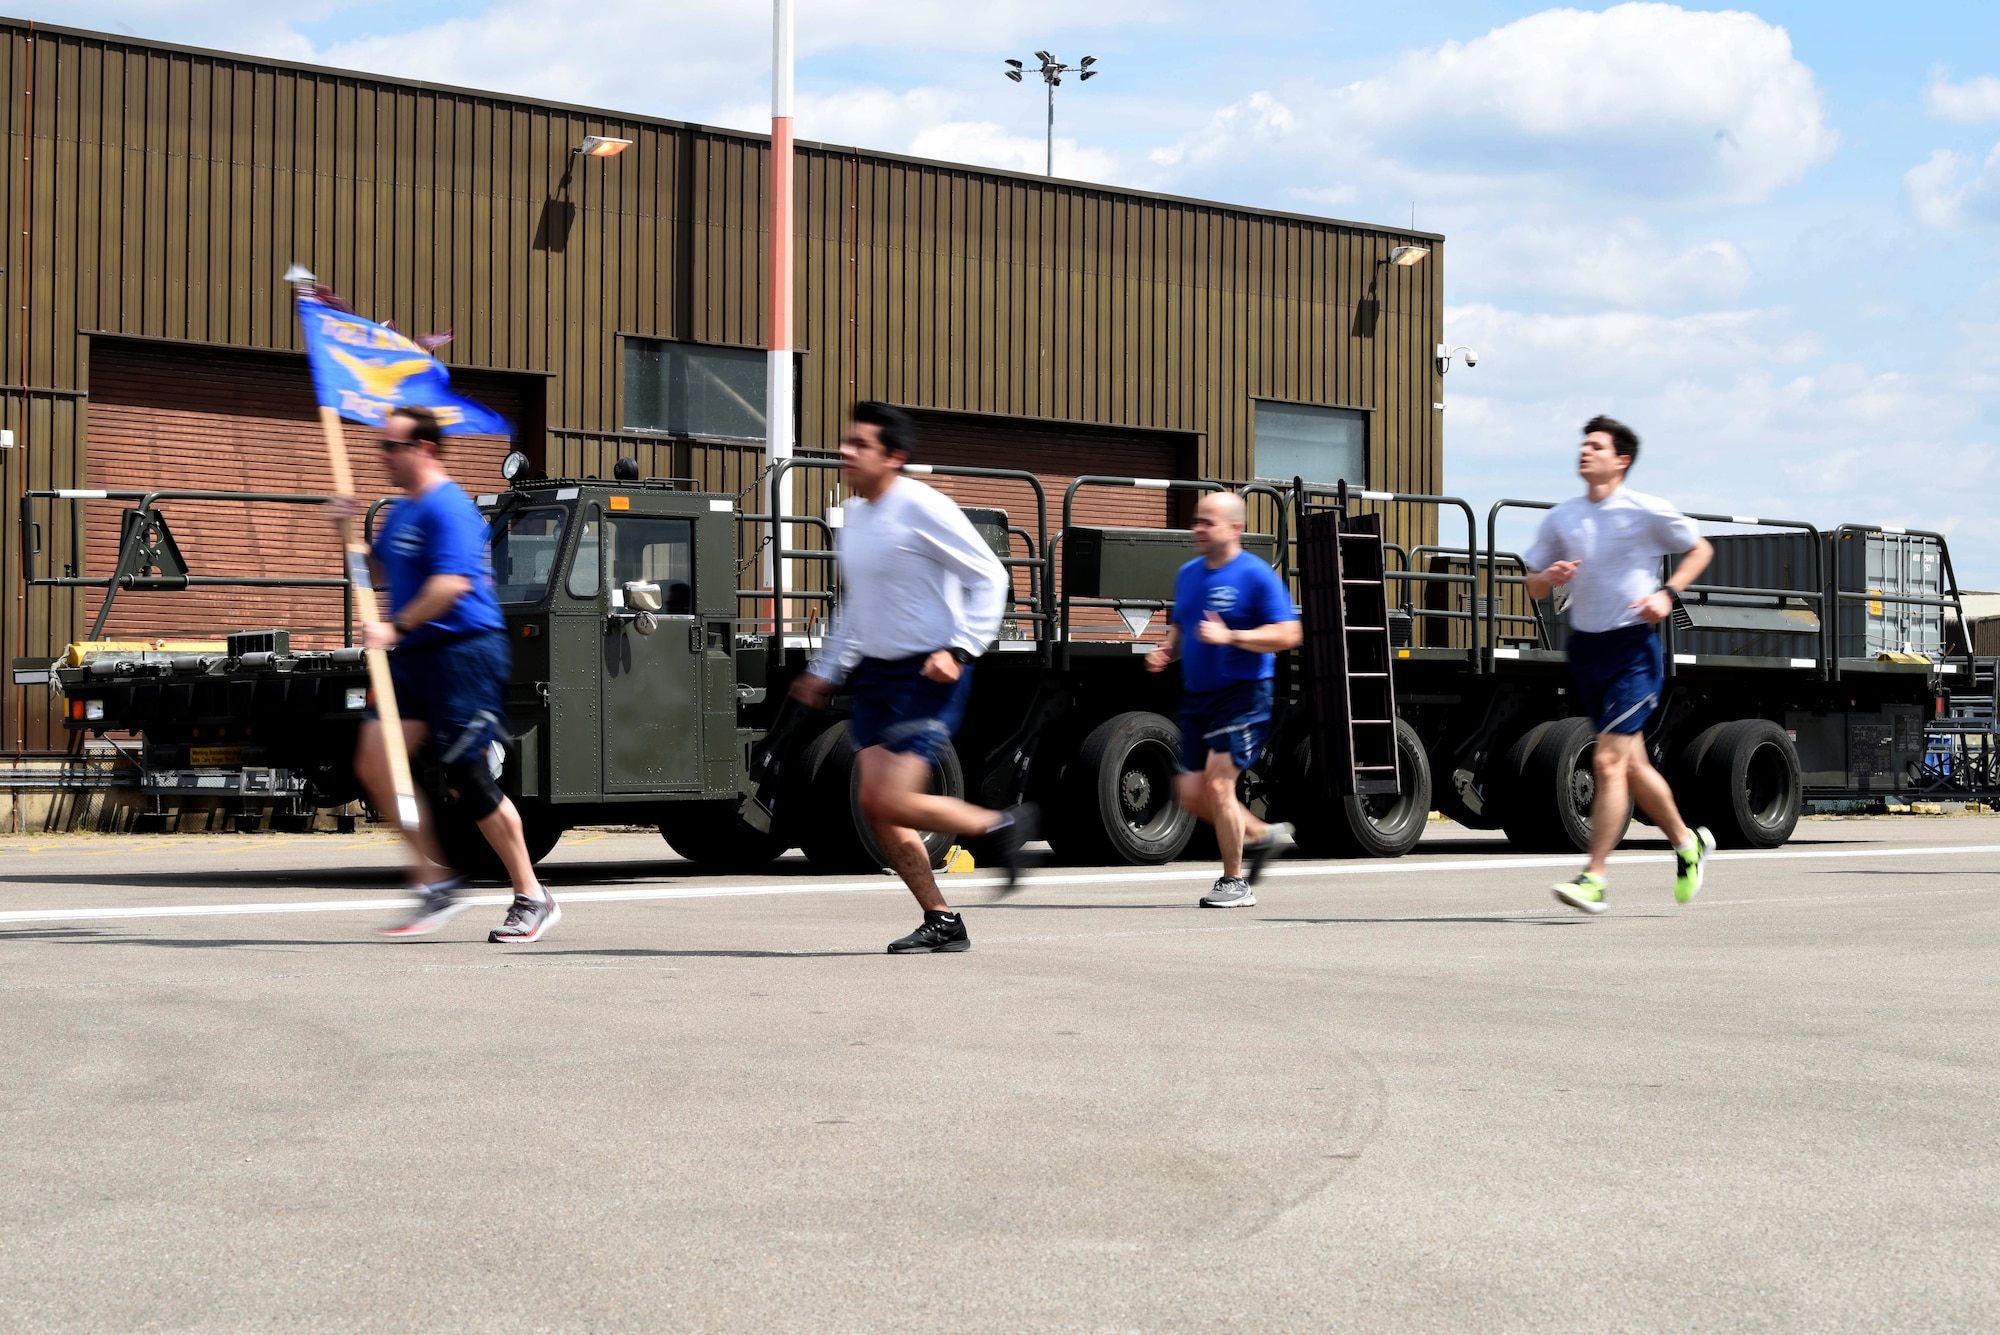 Airmen from the 727th Air Mobility Squadron run during the annual Port Dawg Memorial Run at RAF Mildenhall, England, May 15, 2020. Air transportation community members, commonly referred to as “Port Dawgs,” are responsible for military logistics-related aerial ports across the Air Force. (U.S. Air Force photo by Senior Airman Brandon Esau)